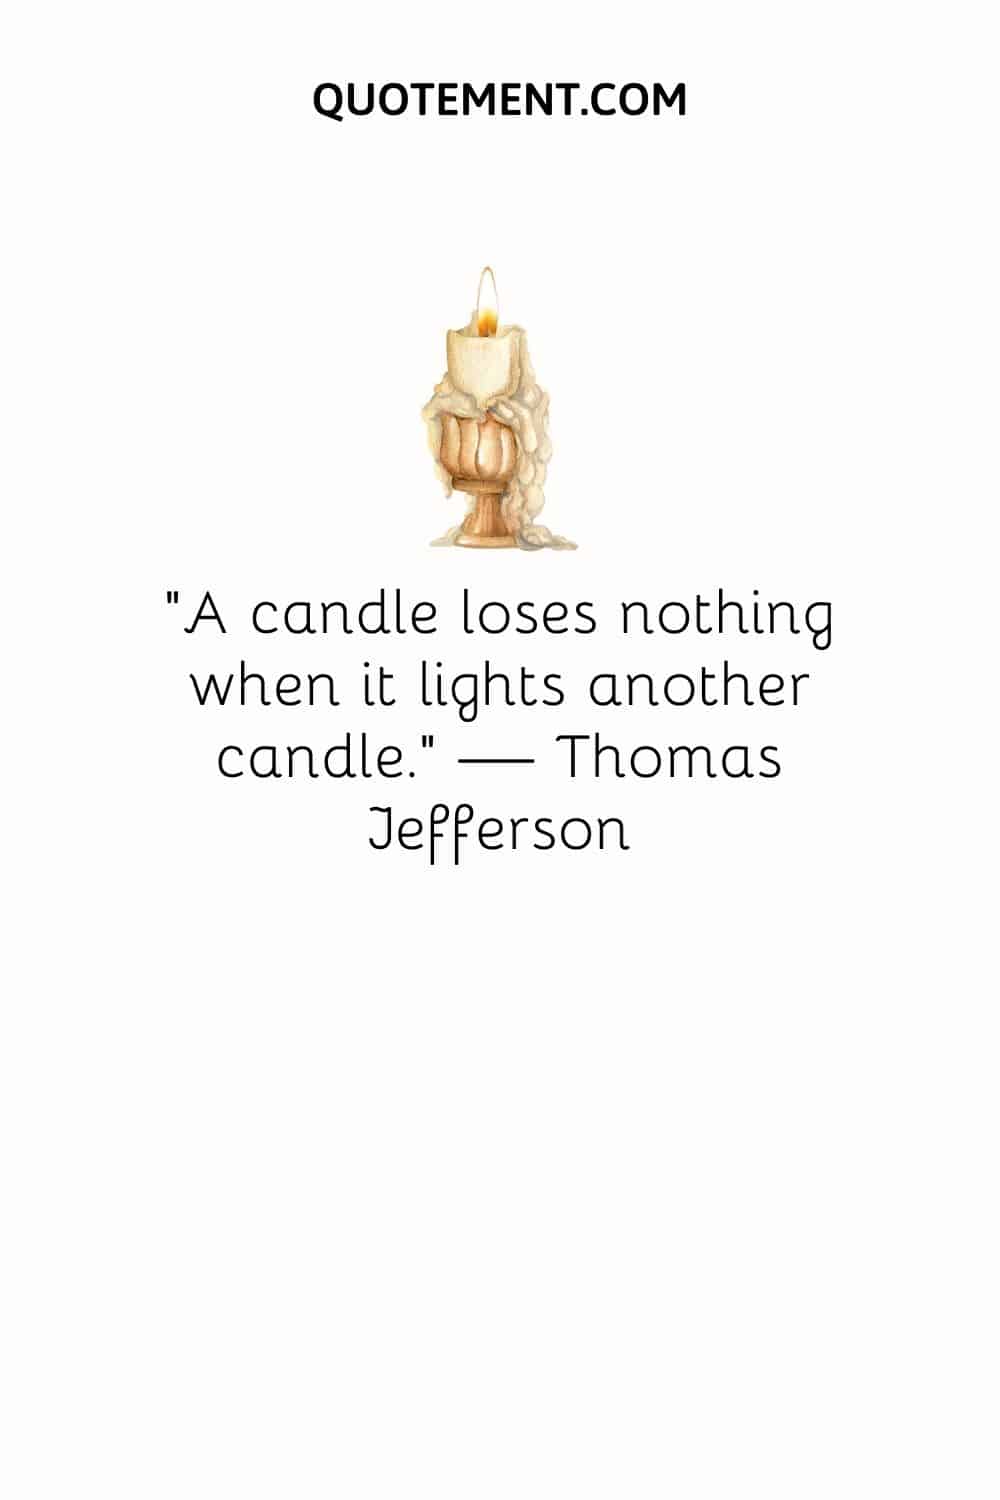 melting candle image representing positive light shine quote